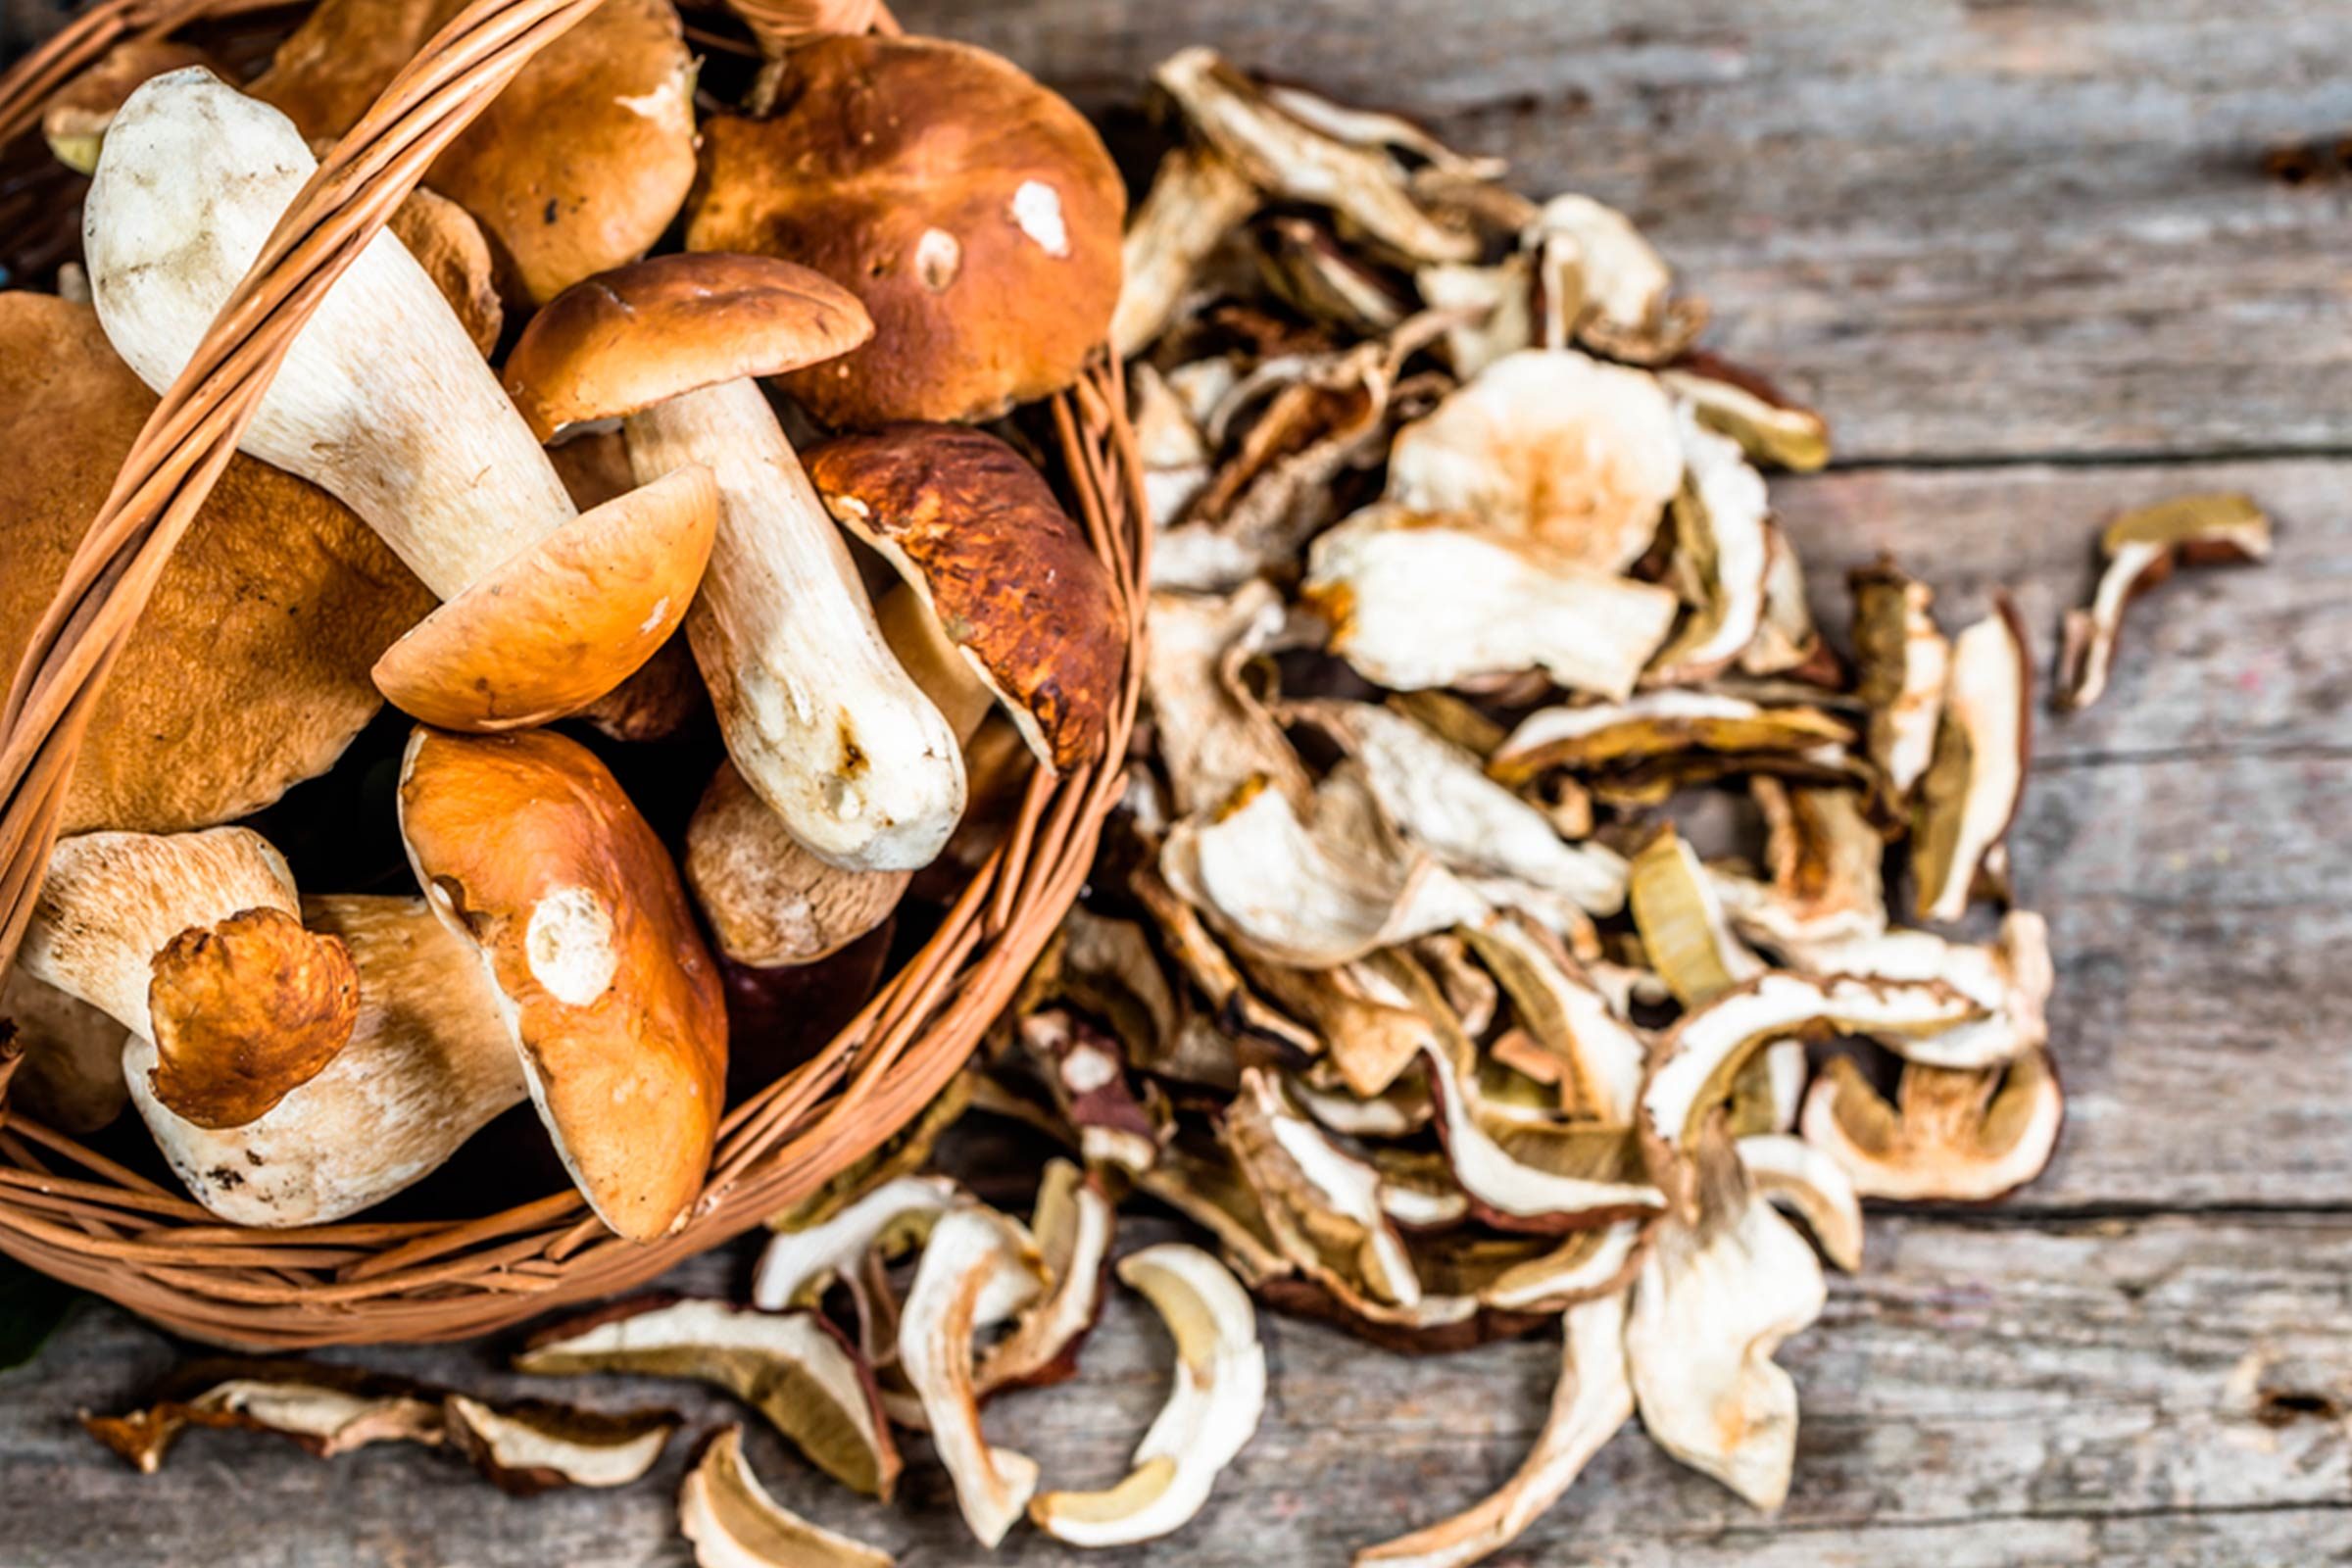 What-You-Never-Realized-About-Mushrooms-Until-Now